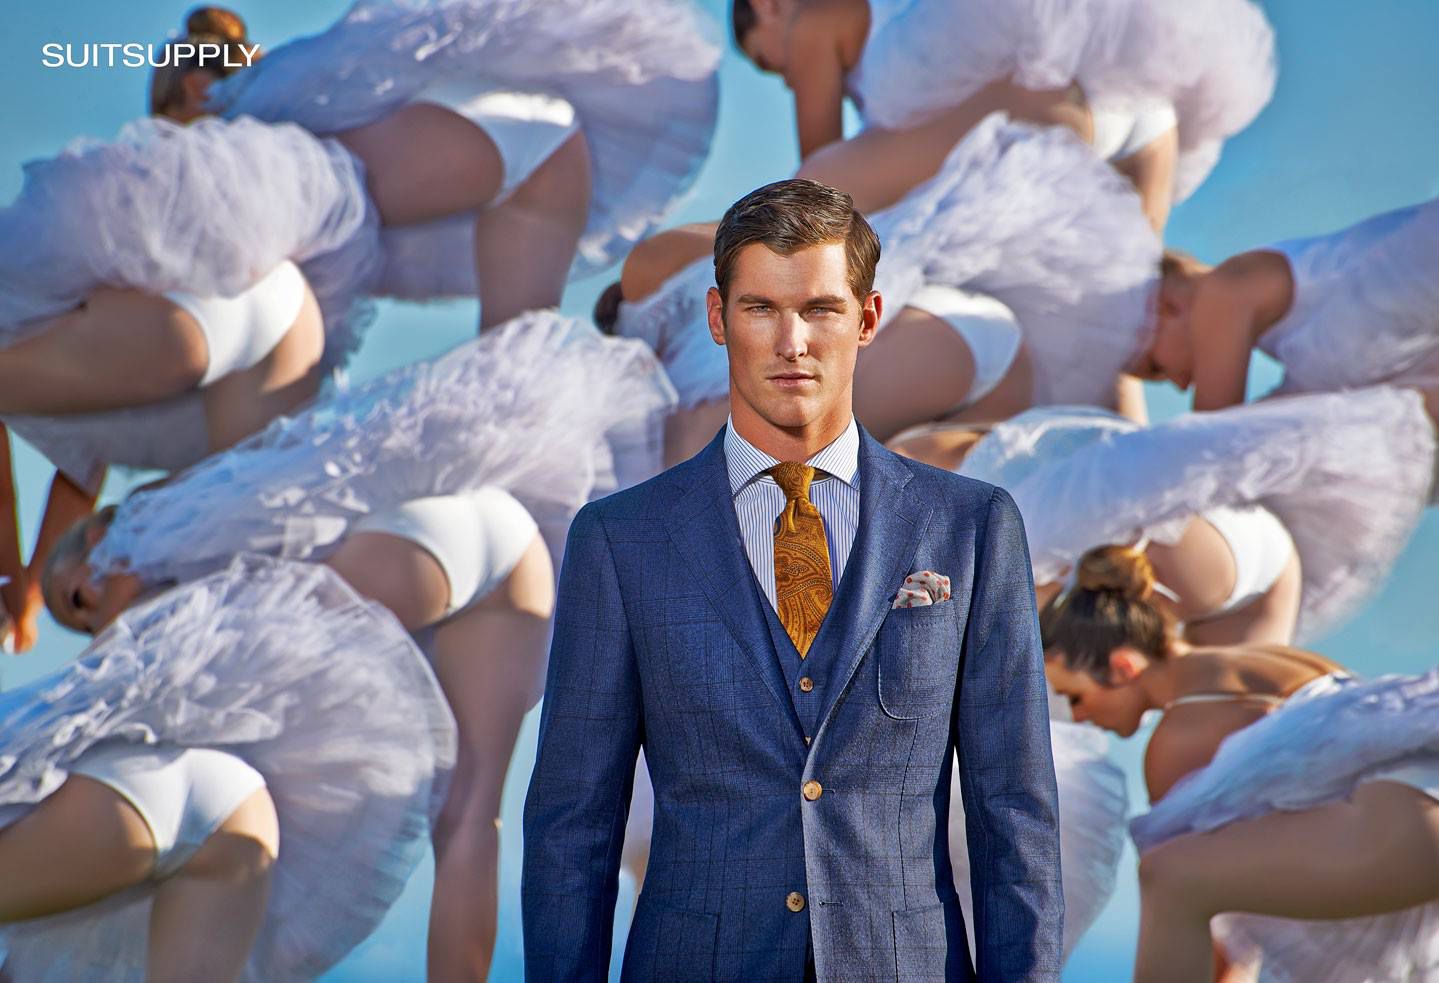 Suitsupply Collection Spring/Summer 2014